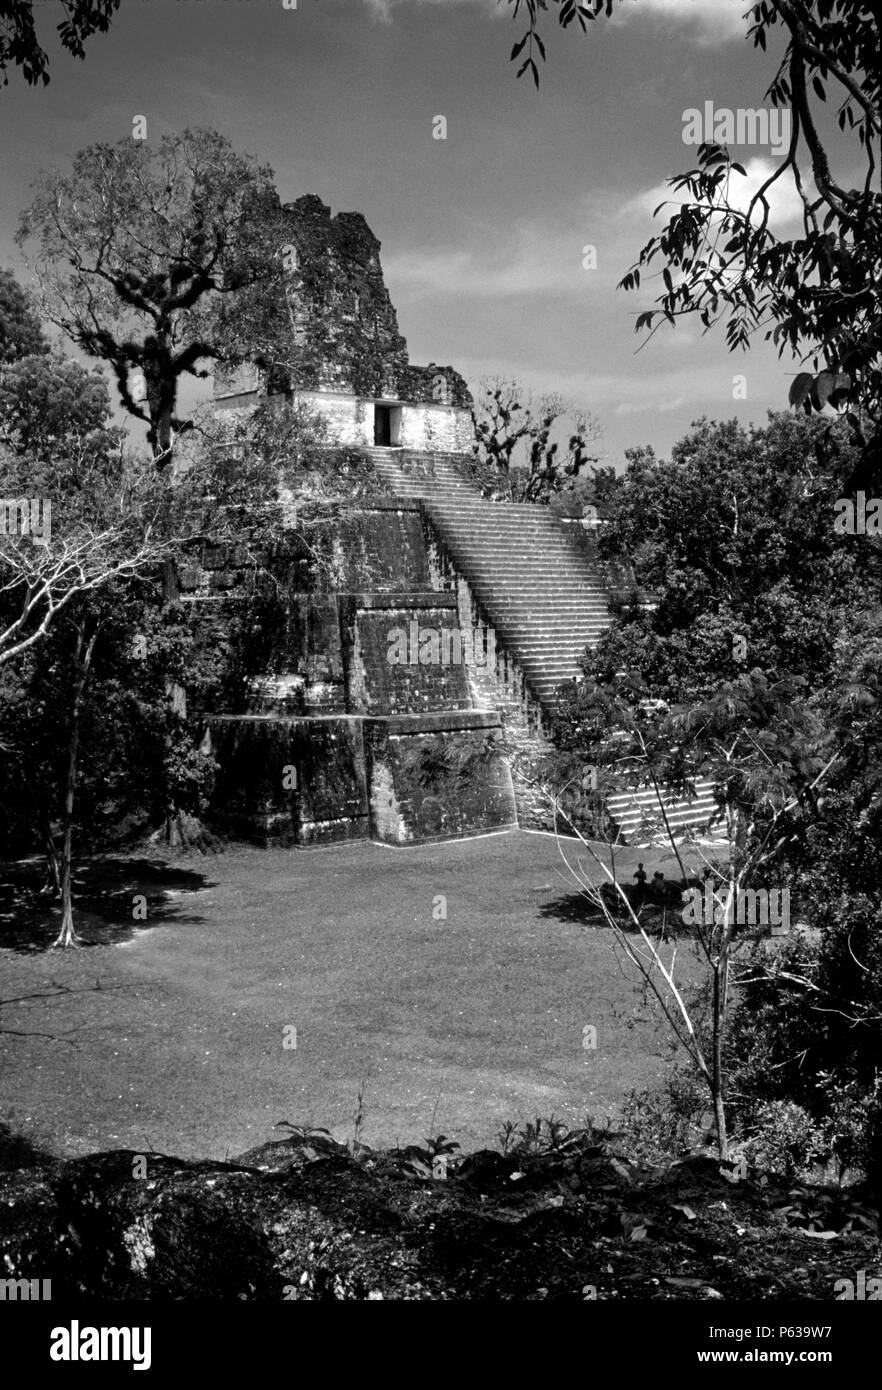 TEMPLE II, 125 ft. tall & dated to 700 AD, an ancient remnant of the great MAYA civilization - TIKAL, GUATEMALA Stock Photo